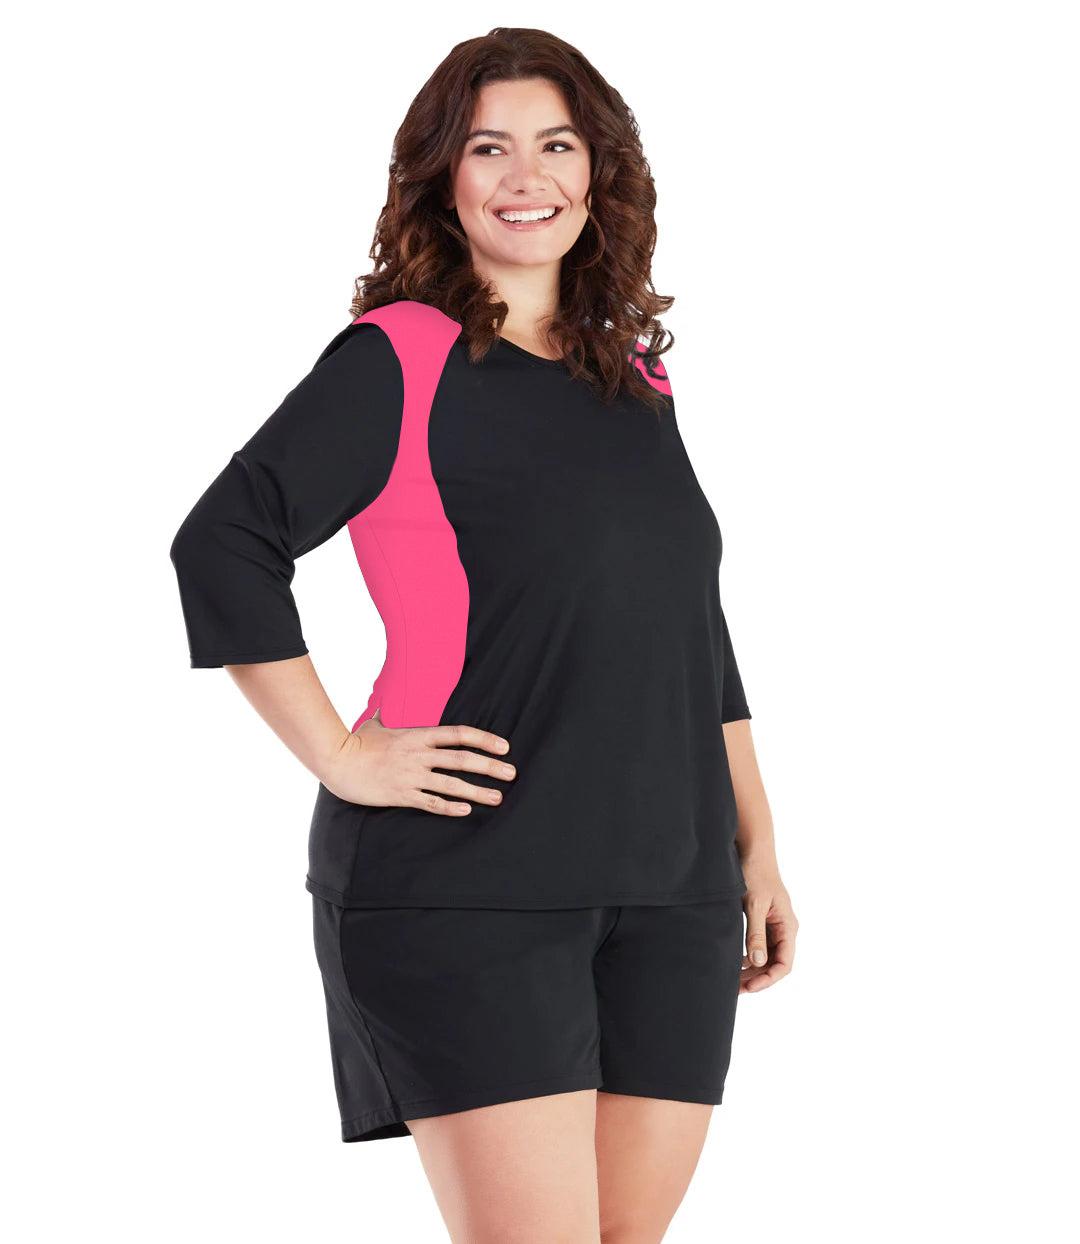 Plus size woman, facing front, wearing AquaSport Three Quarter Sleeve Rash Guard Pink and Black. V-neckline, black torso and sleeves with pink colorblock at shoulder and waist. She is wearing a pair of black JunoActive plus size swim shorts. 